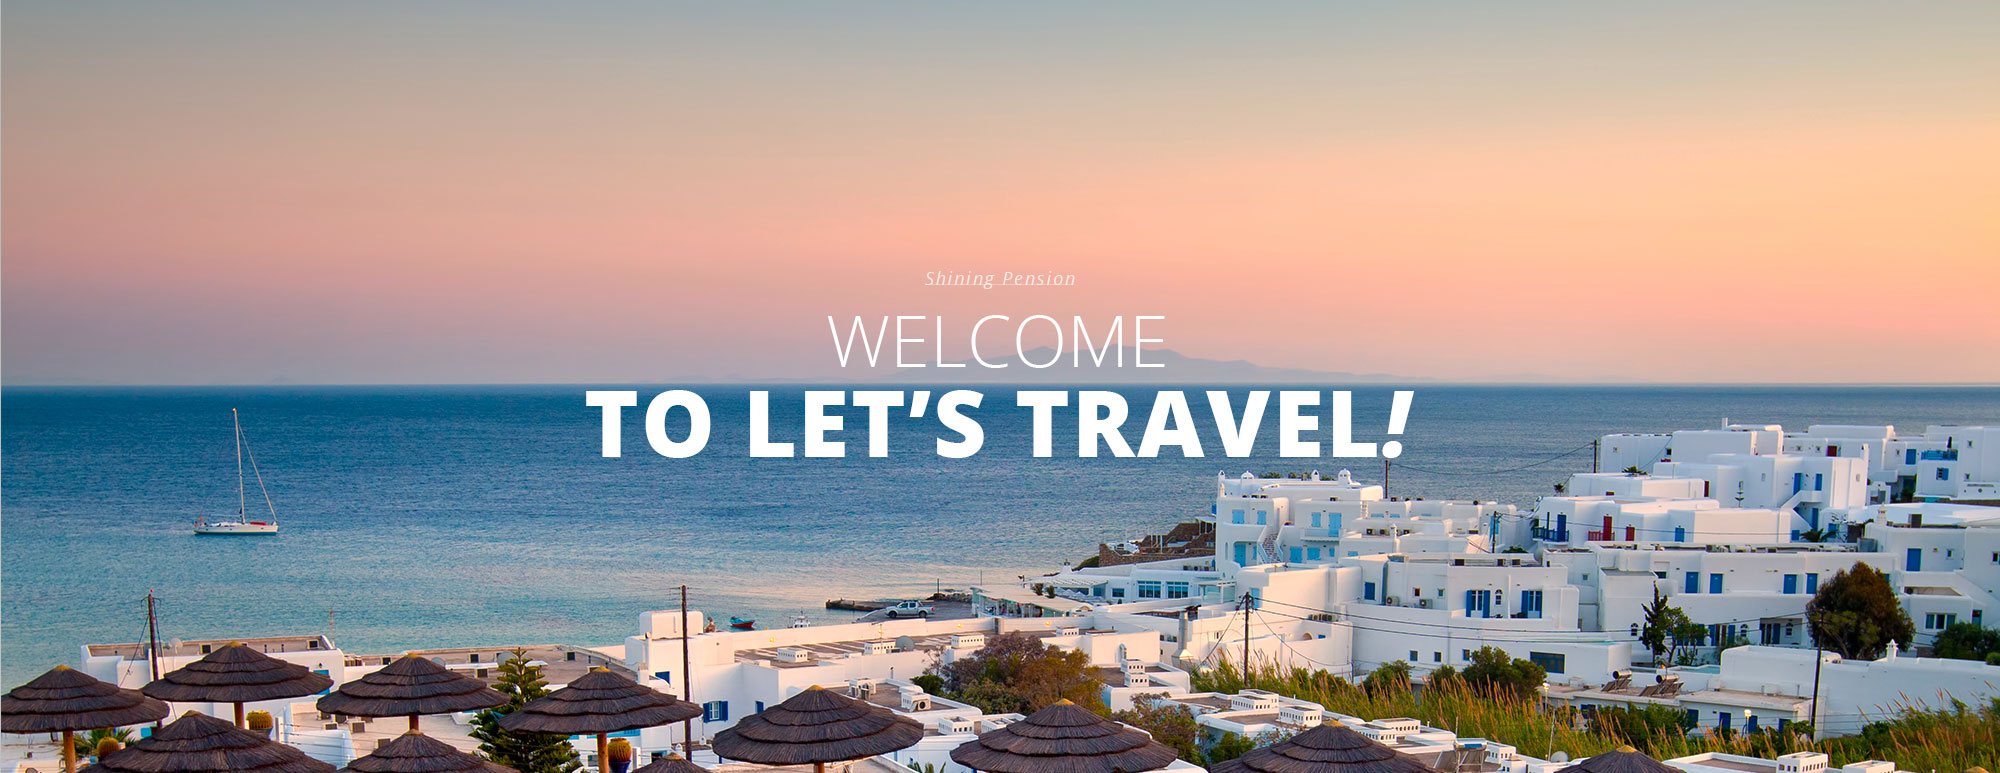 shining pension welcome to let's travel!